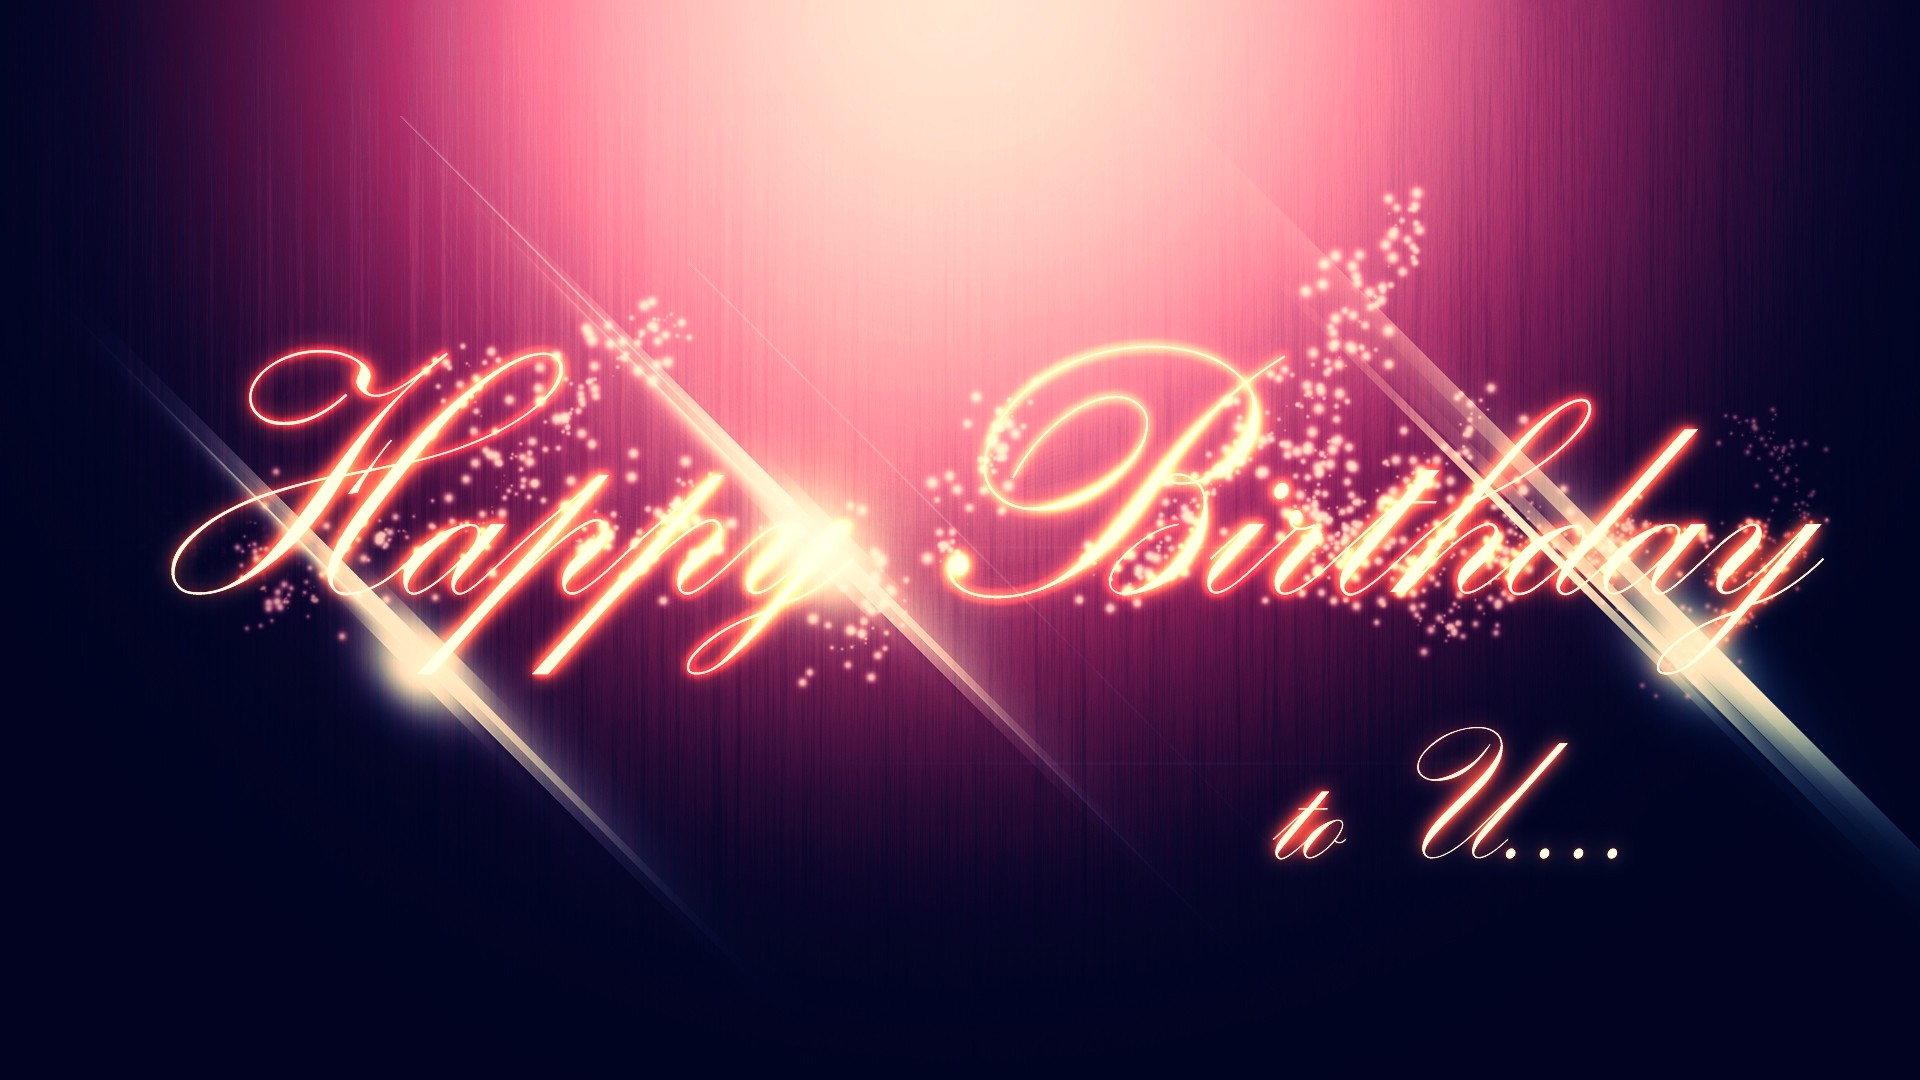 Happy Birthday 2013 Greeting Cards HD Wallpaper of 1920x1080